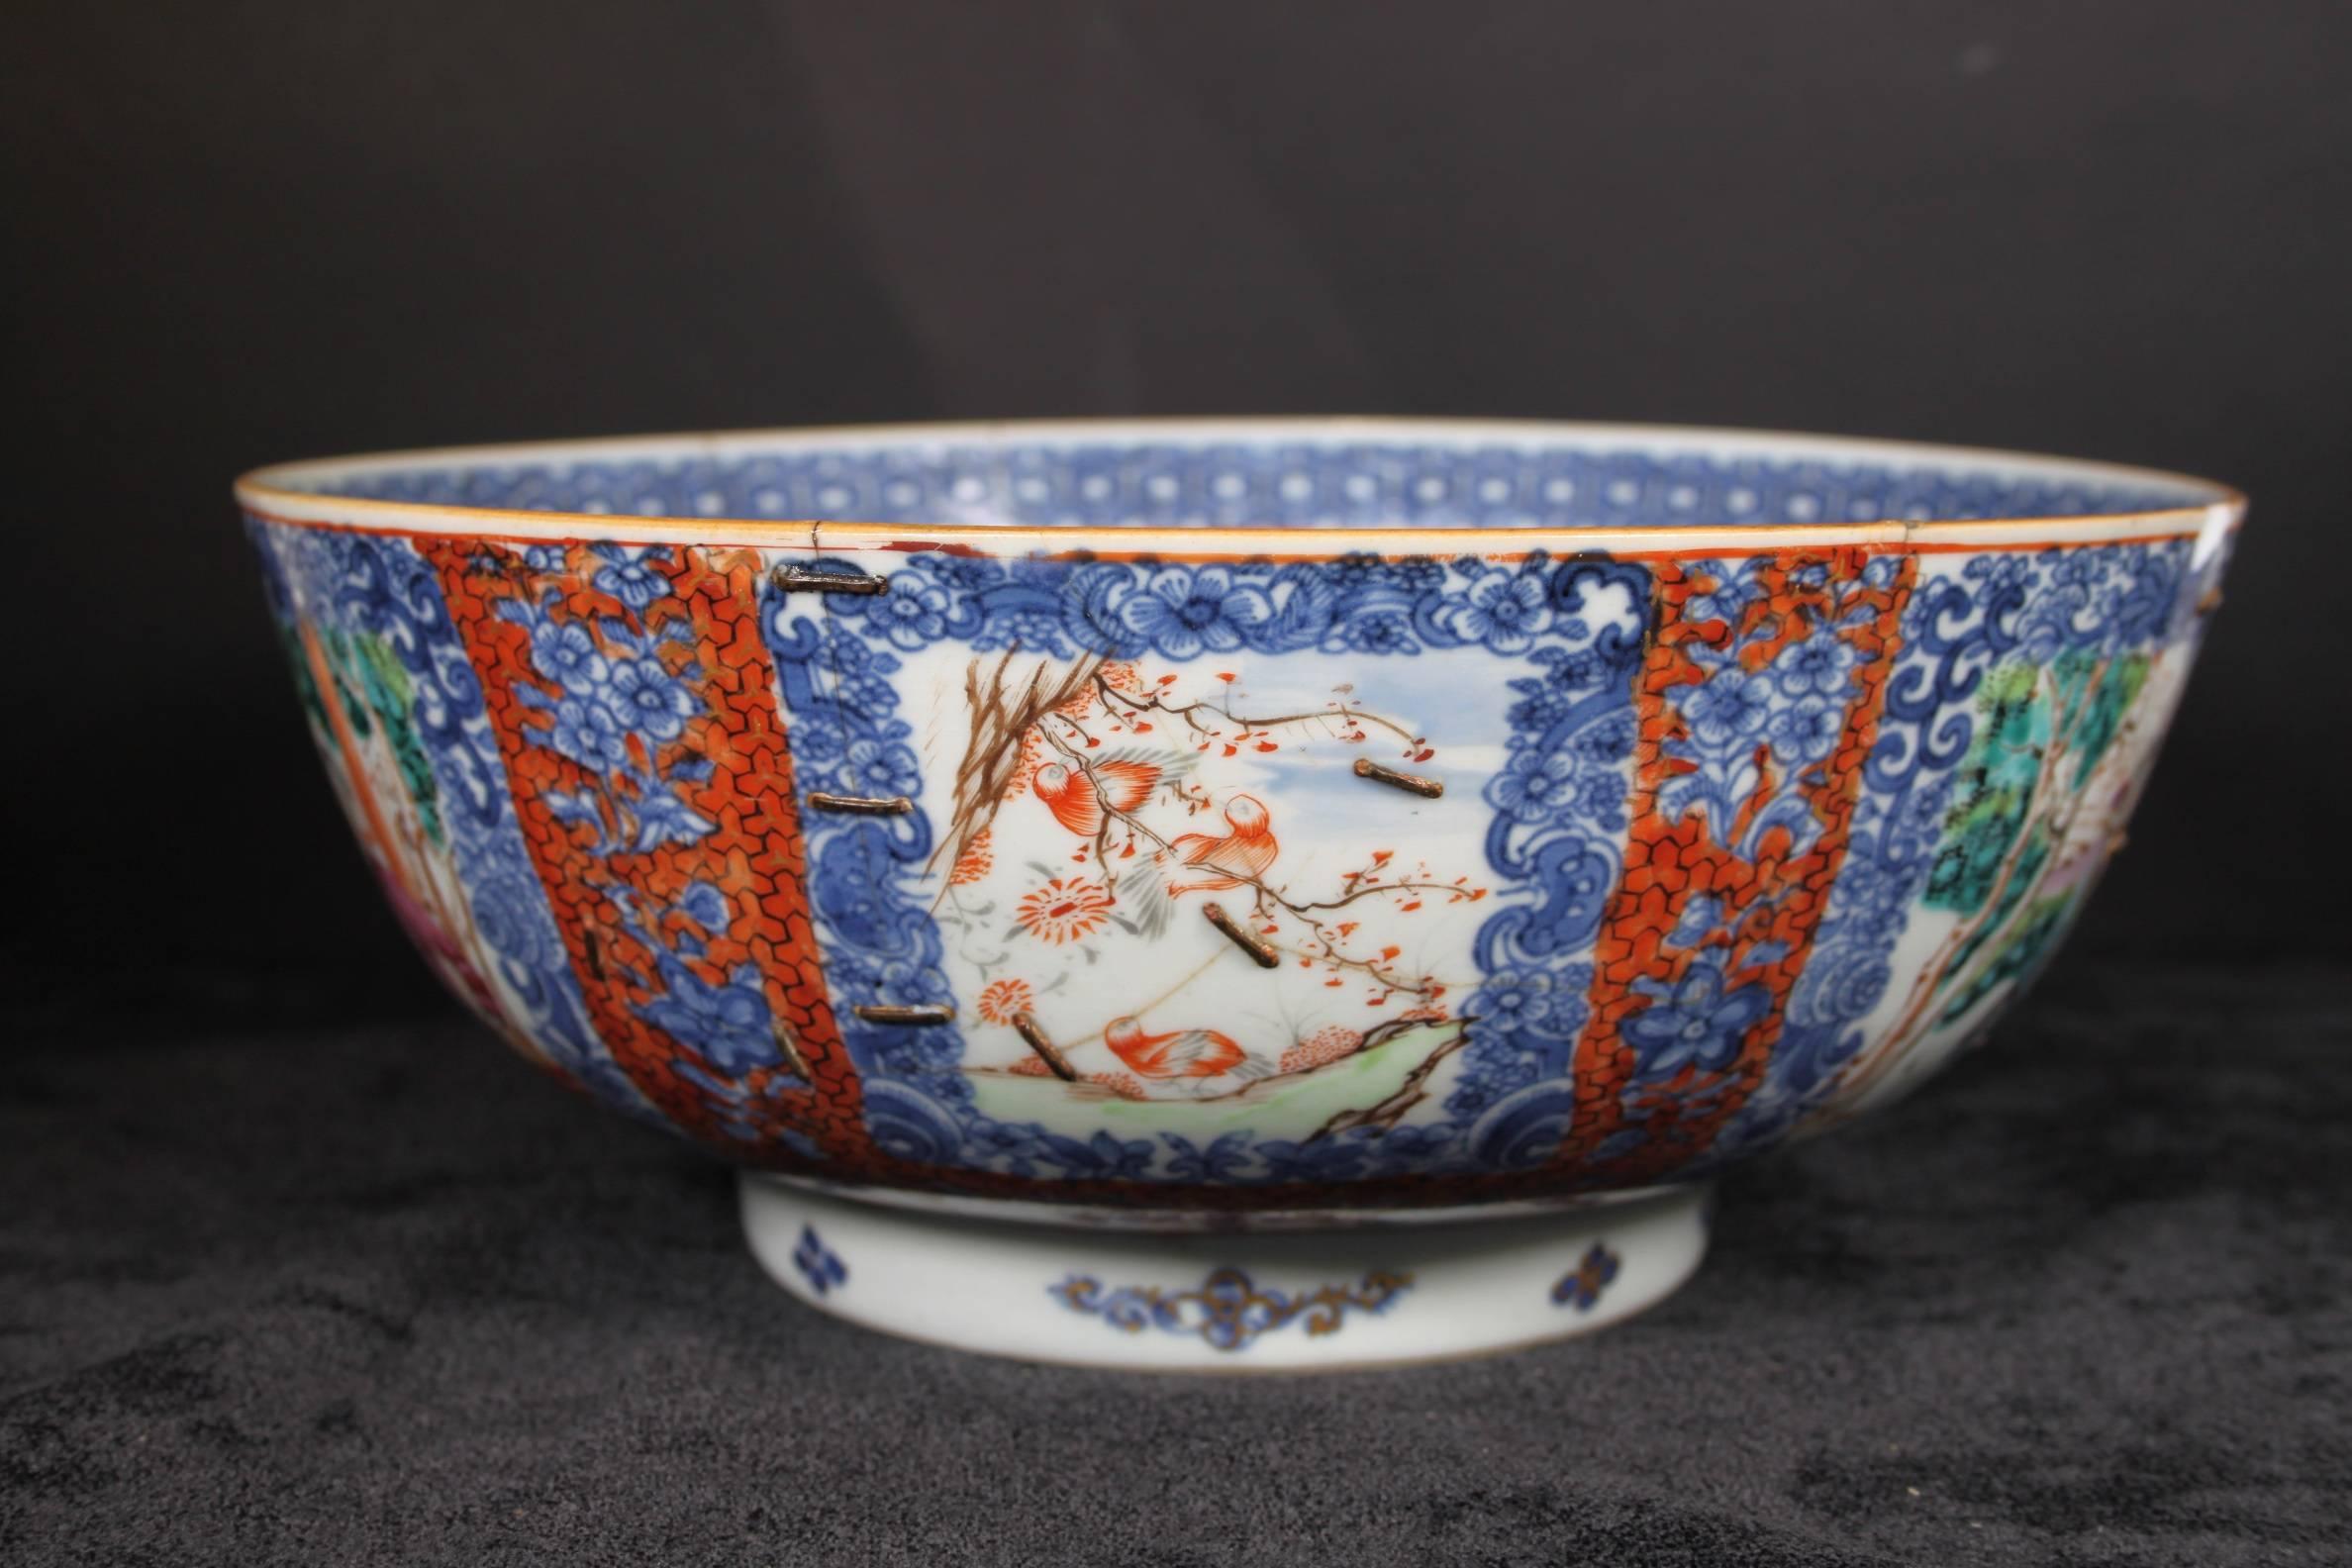 18th Century Qianlong Qing Dynasty Chinese Export Ware Porcelain Punch Bowl For Sale 3